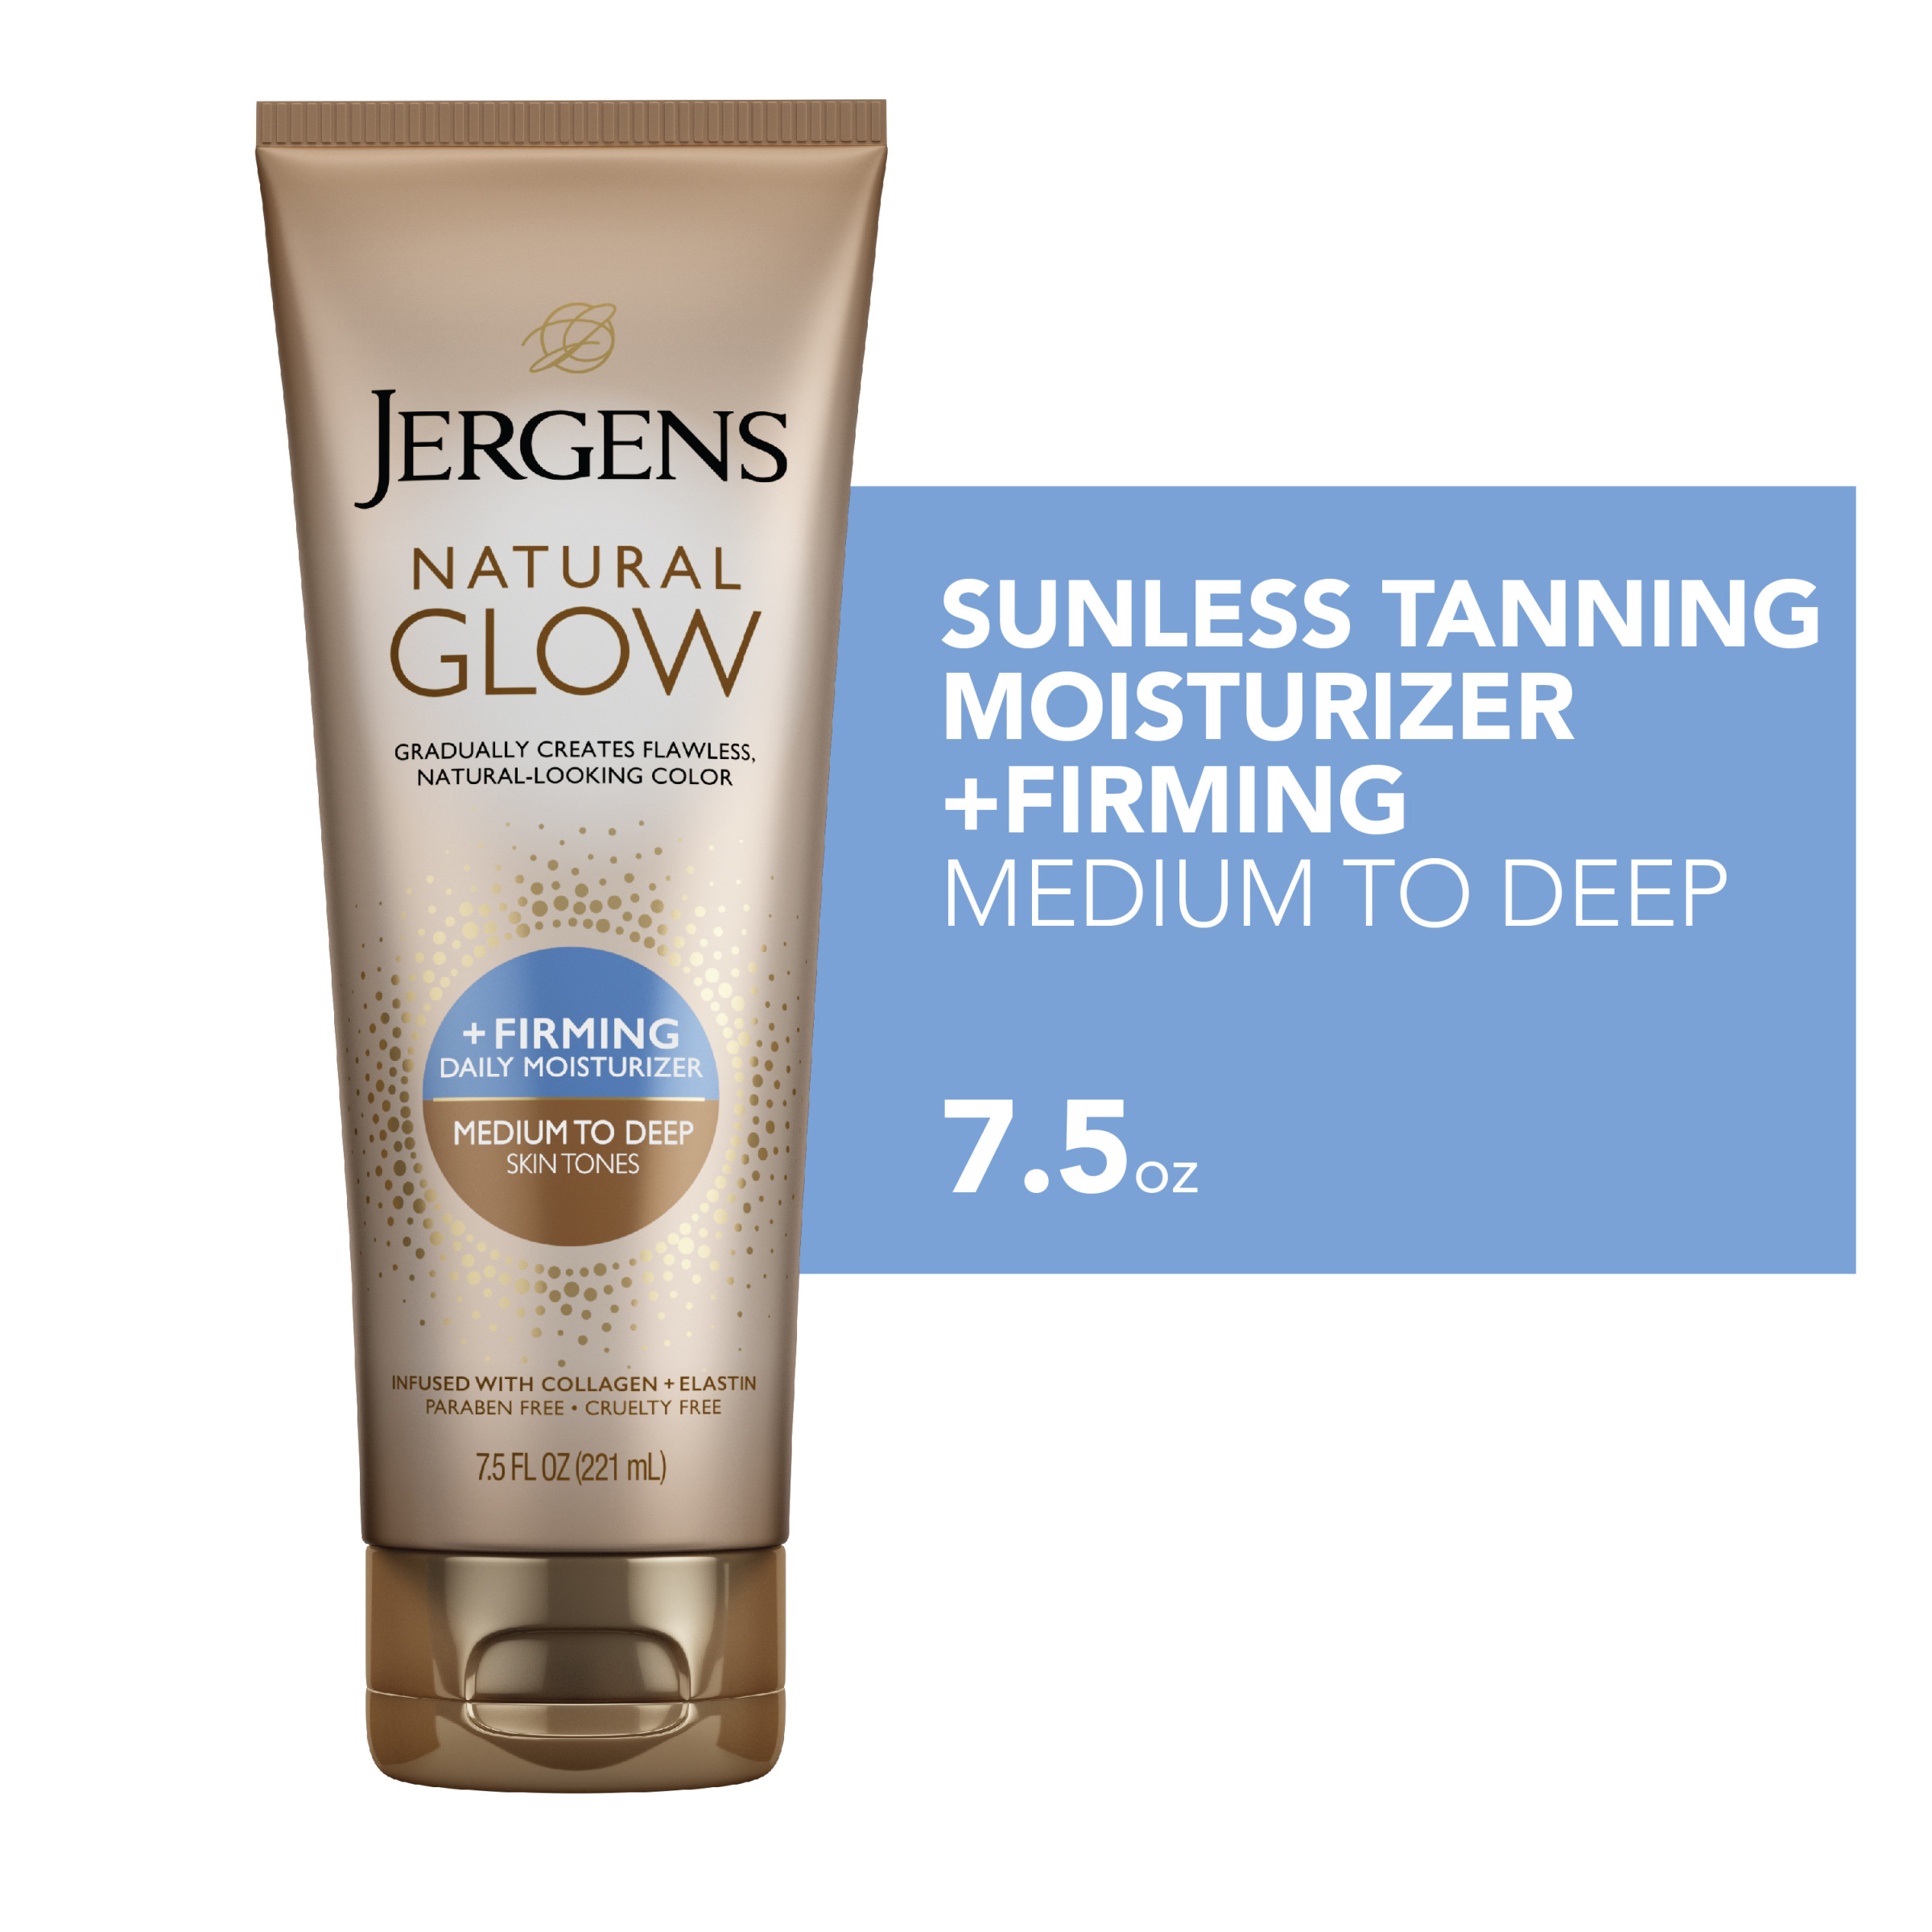 Jergens Natural Glow +FIRMING Sunless Tanning Daily Body Lotion, Medium to Deep Skin Tone, 7.5 fl oz - image 1 of 12